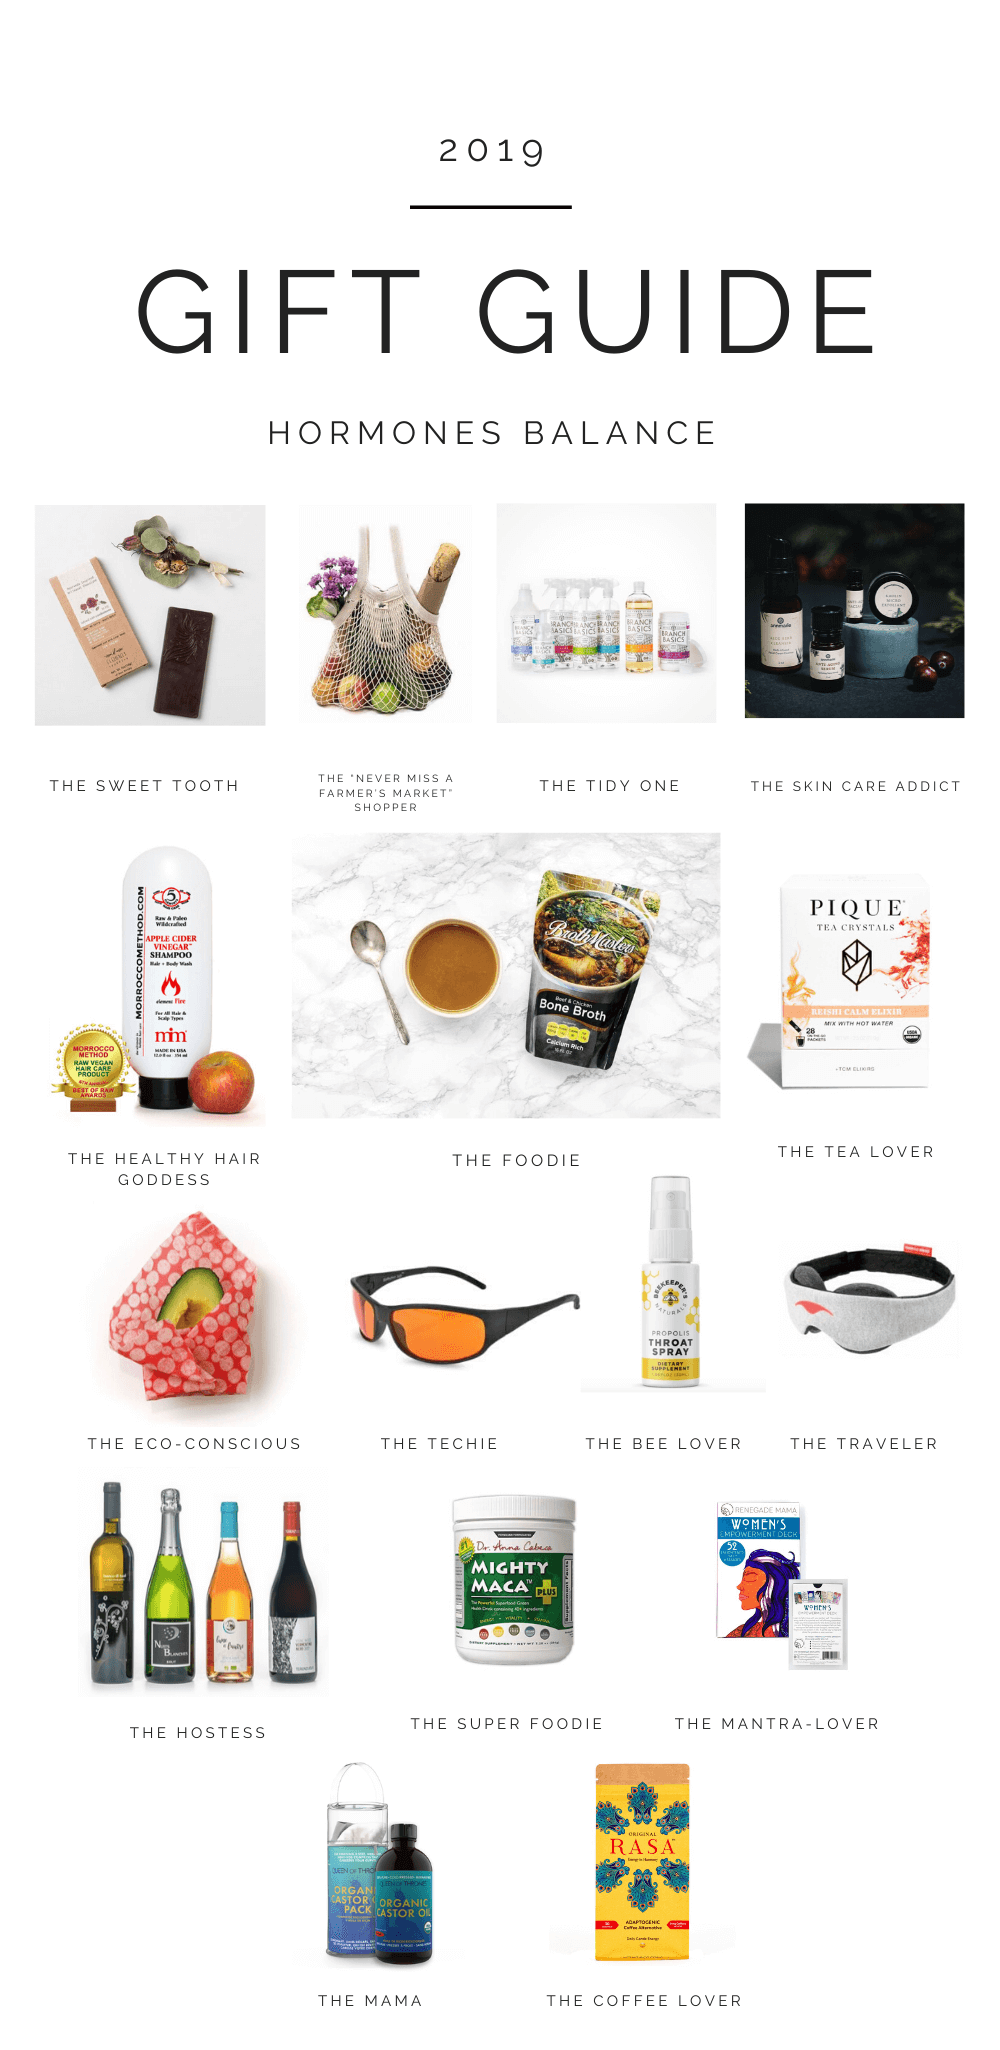 Meet the No BS Gift Guide to Clean, Better-for-You Gifts